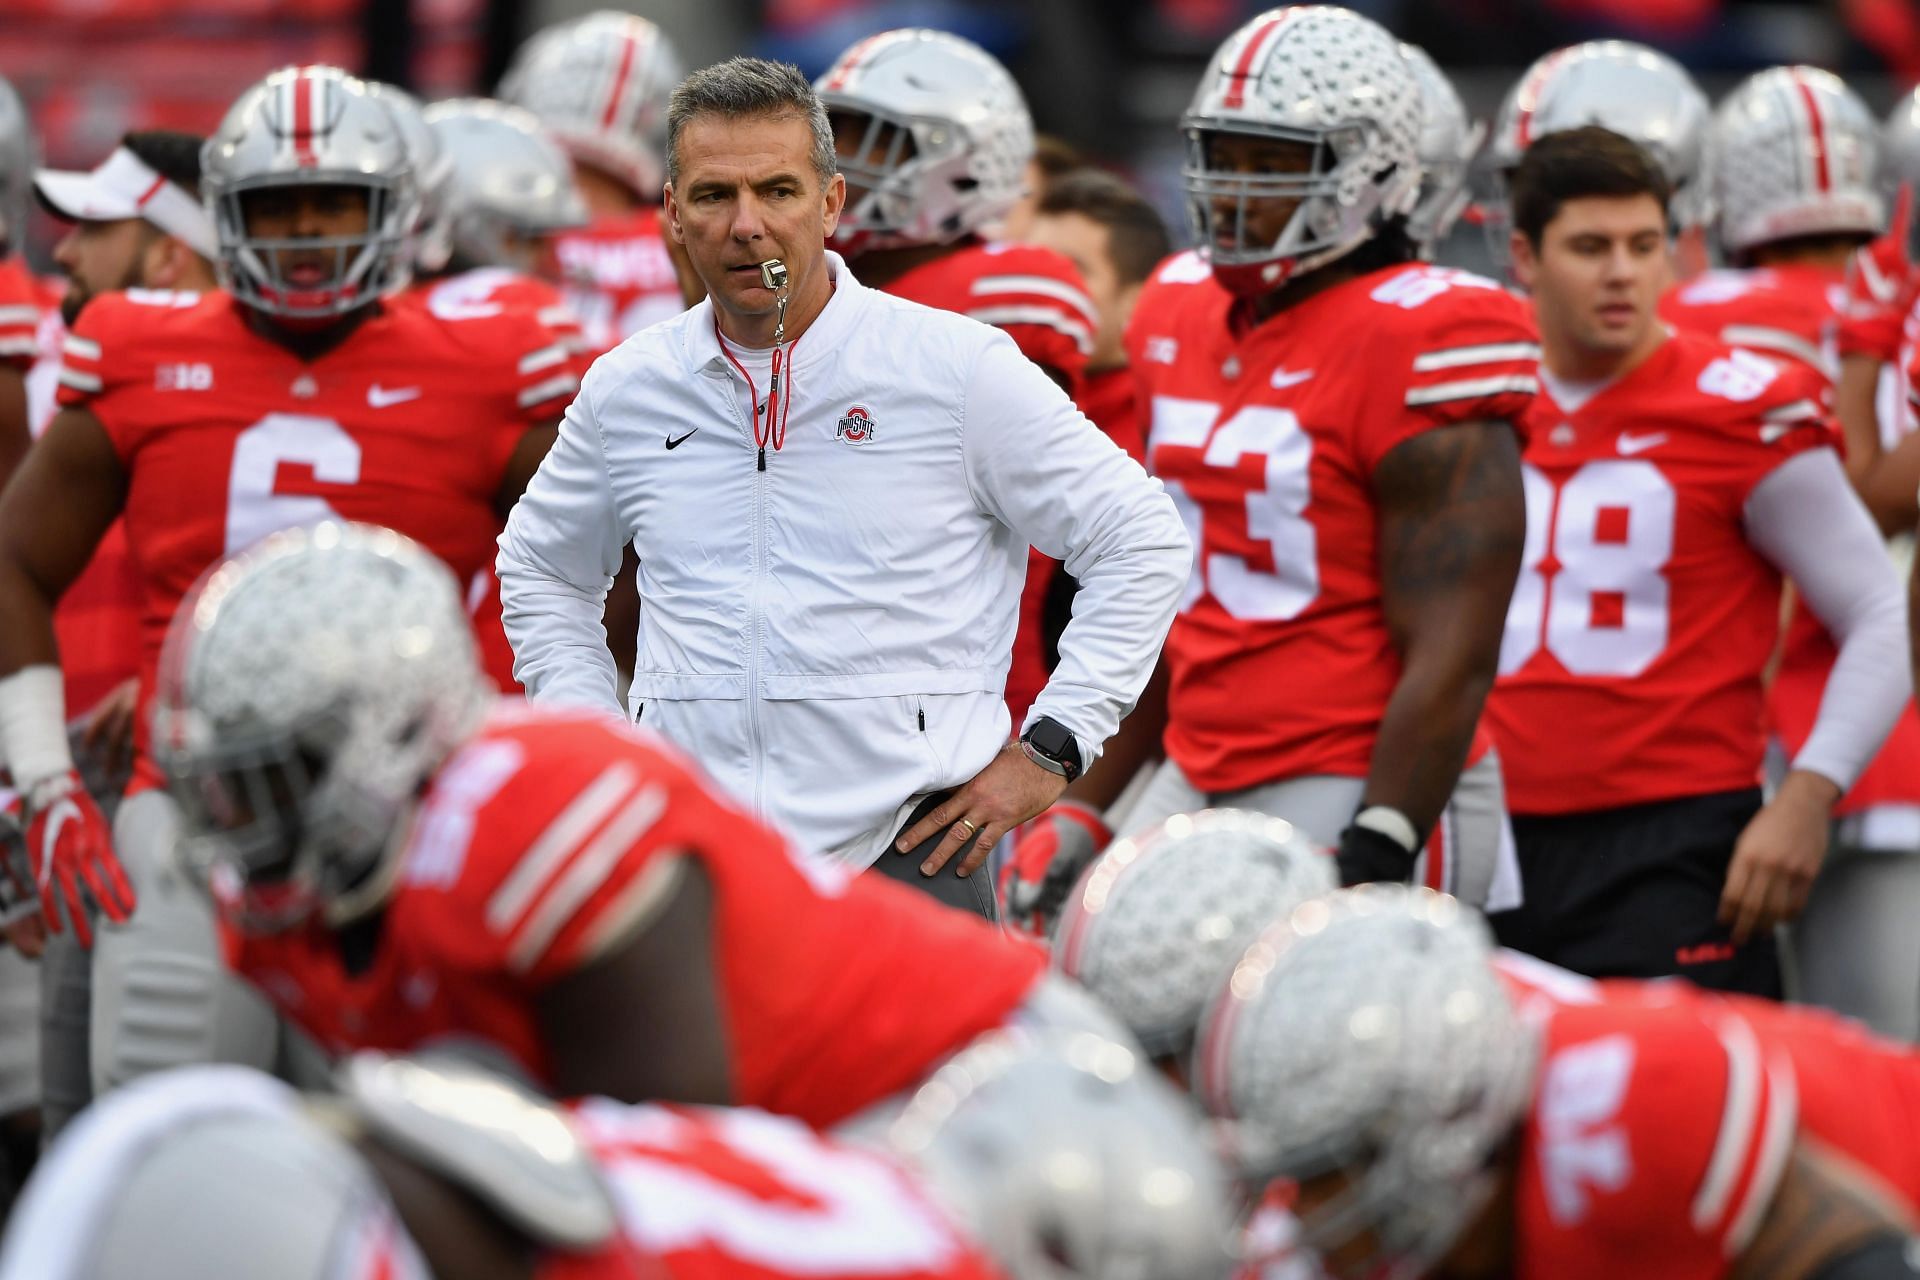 Meyer led Ohio State to a national title in 2014.